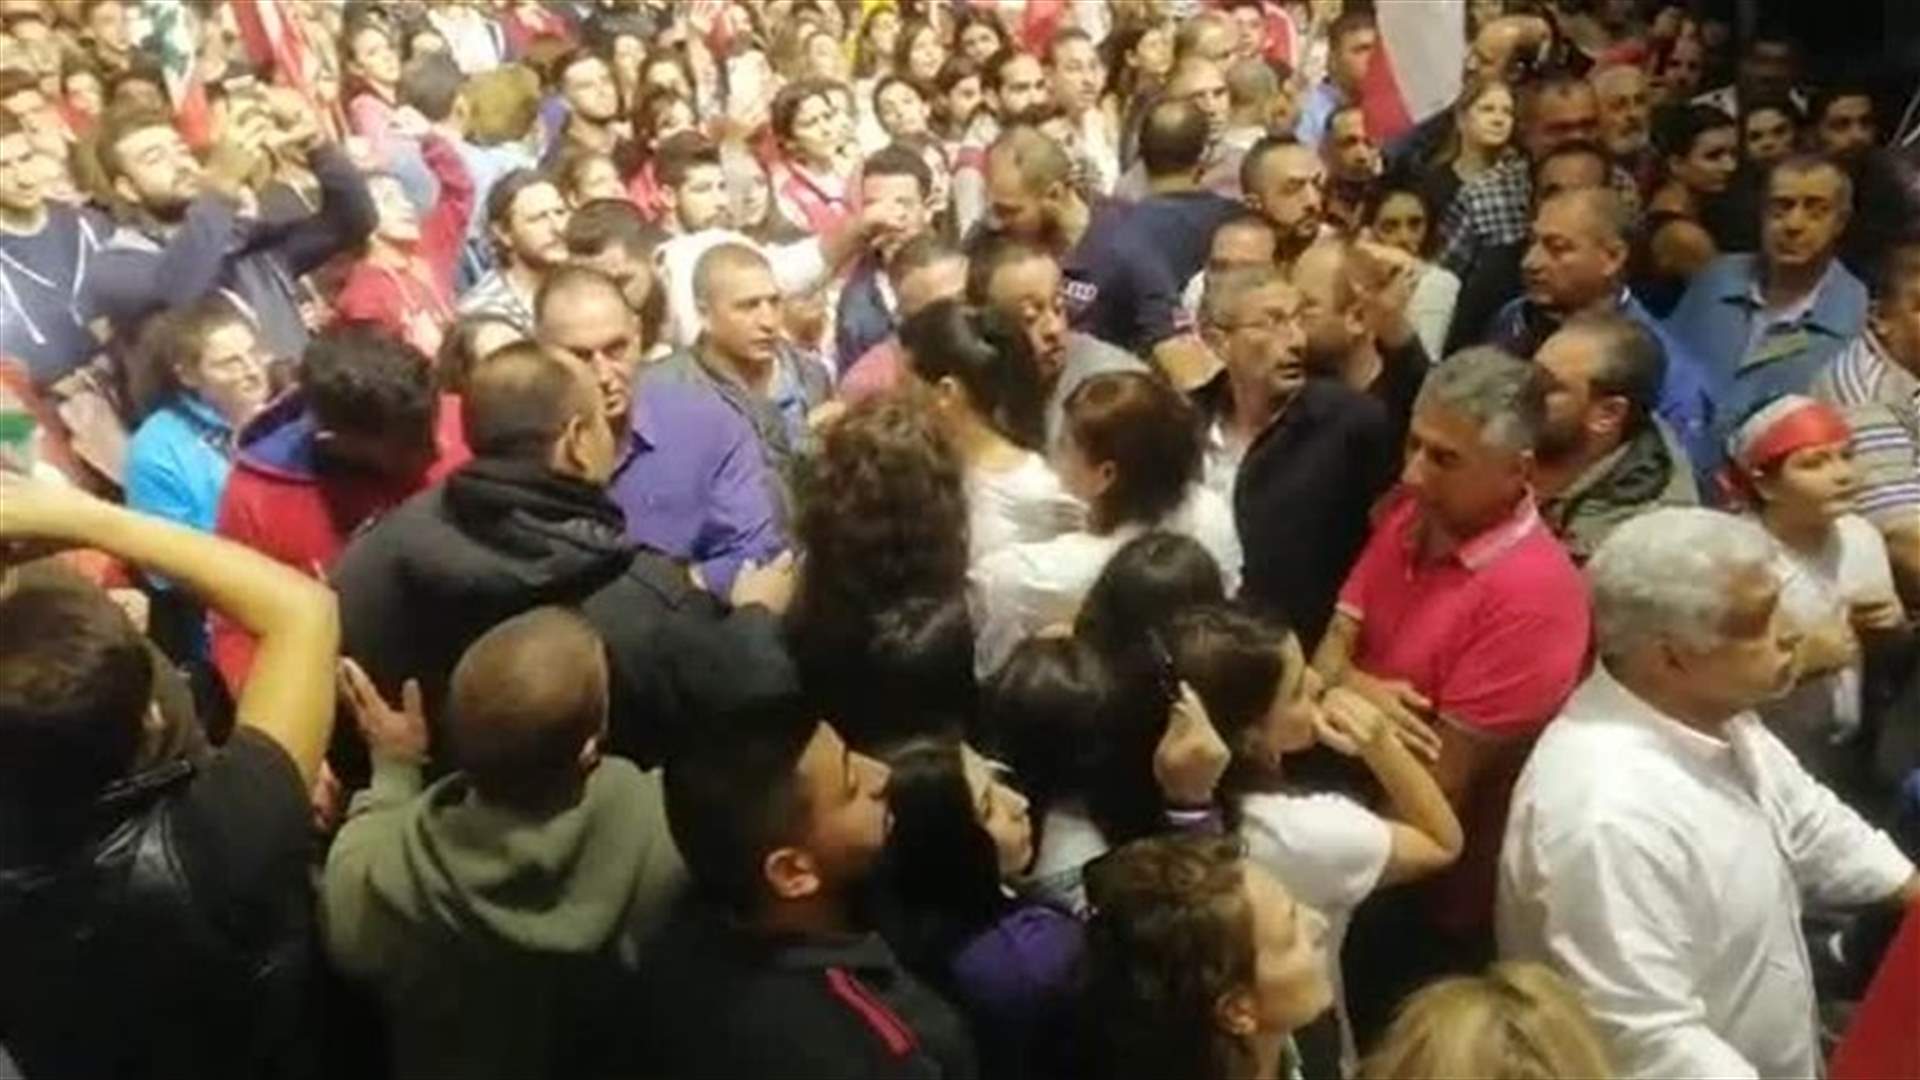 Myriam Skaff leaves protest after demonstrators objected to her participation (Video)